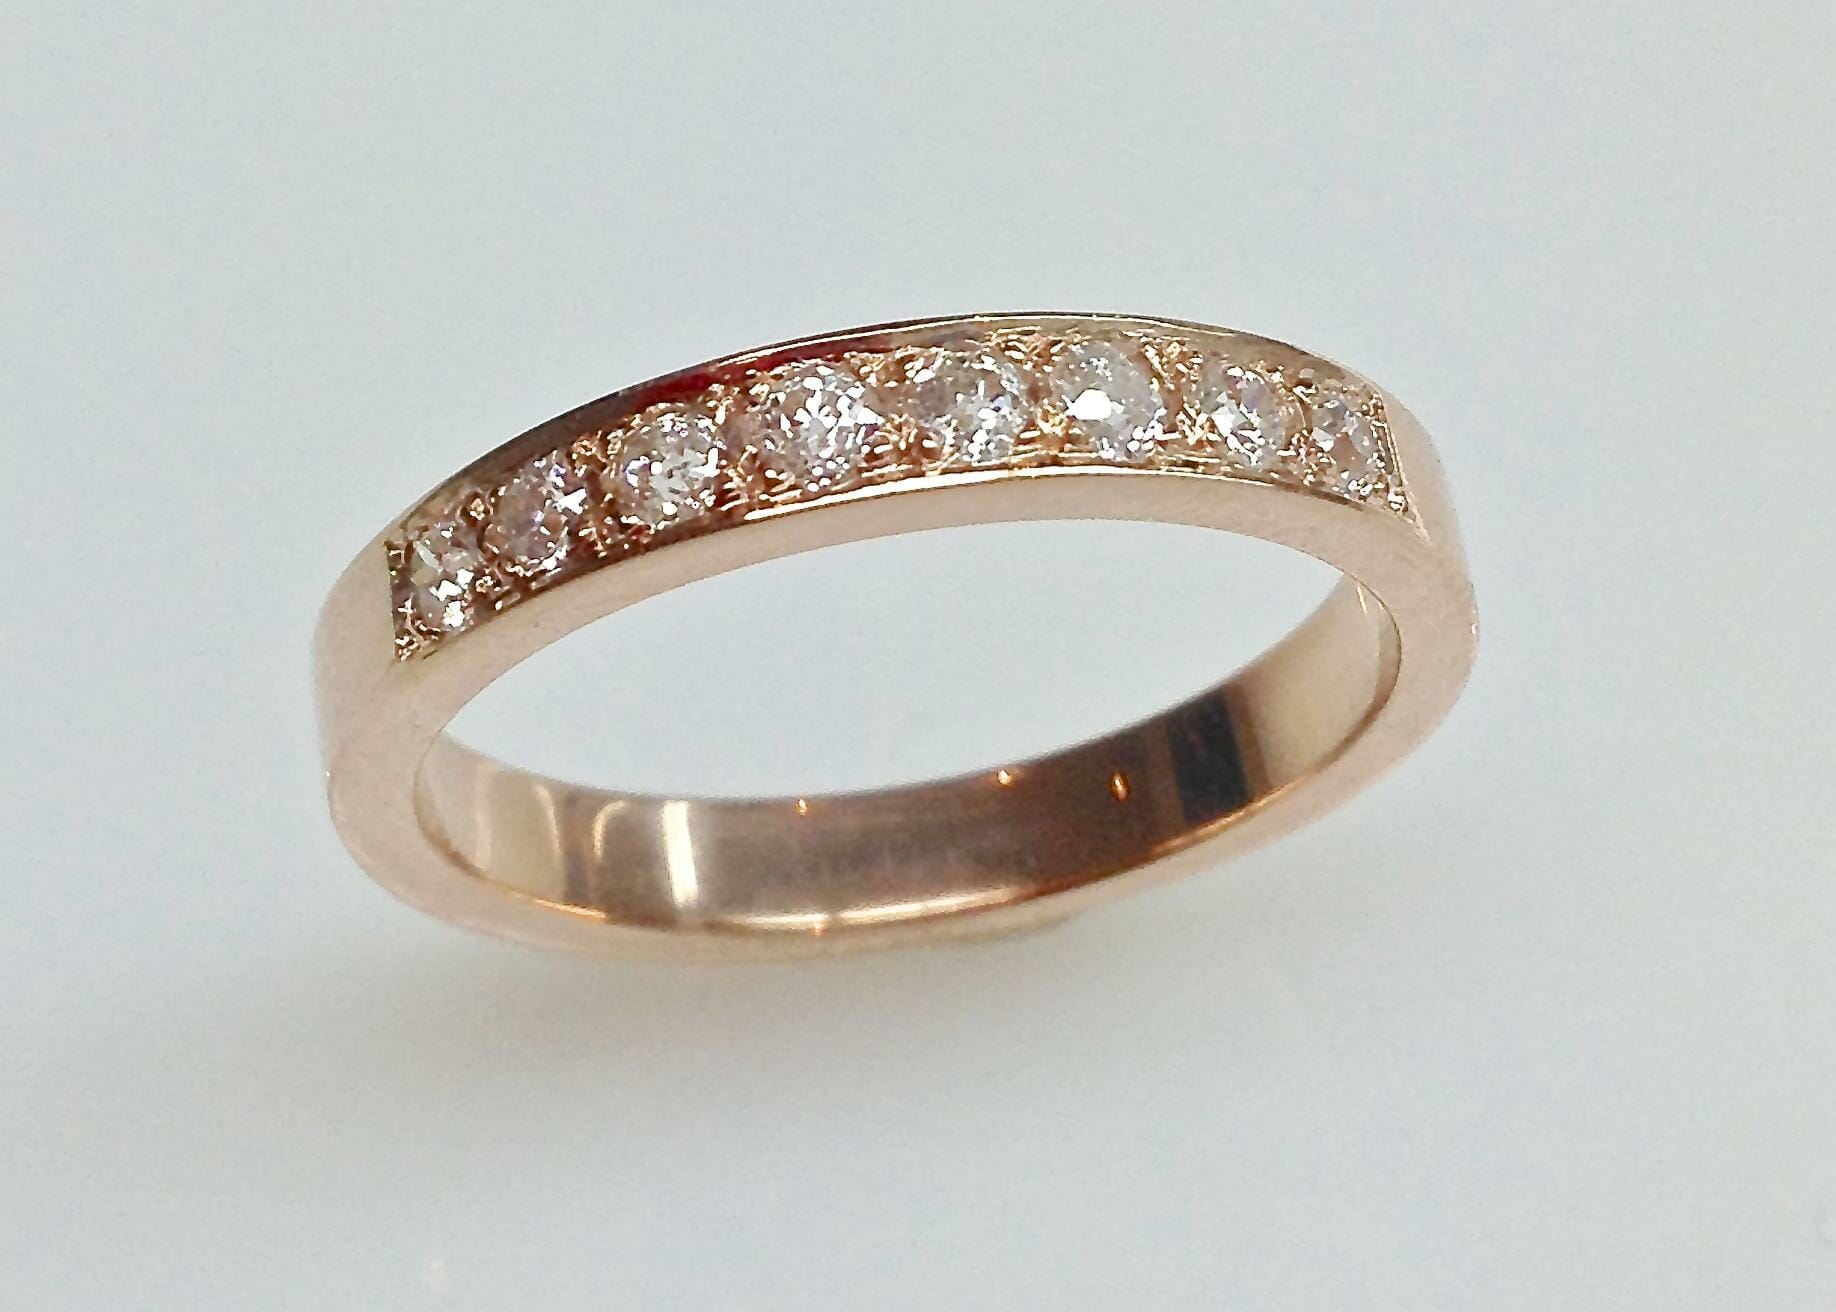 Rose Gold Wedding Ring with Pave Diamonds  Keezing Kreations